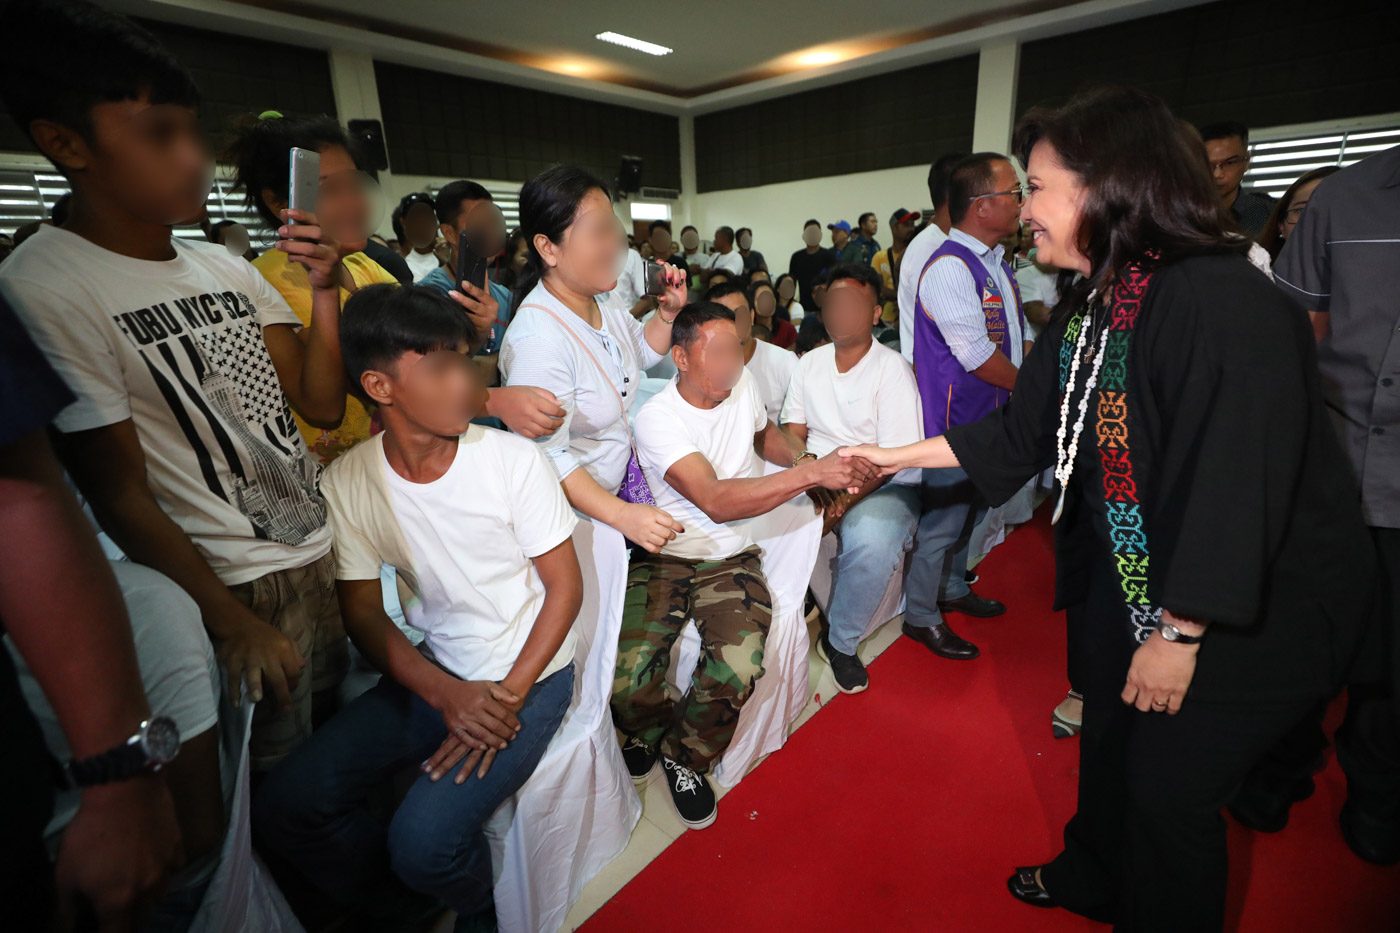 REHABILITATION. Vice President Leni Robredo greets the drug reformists from Bahay Pagbabago in Dinalupihan in Bataan on November 21, 2019. Photo by OVP 